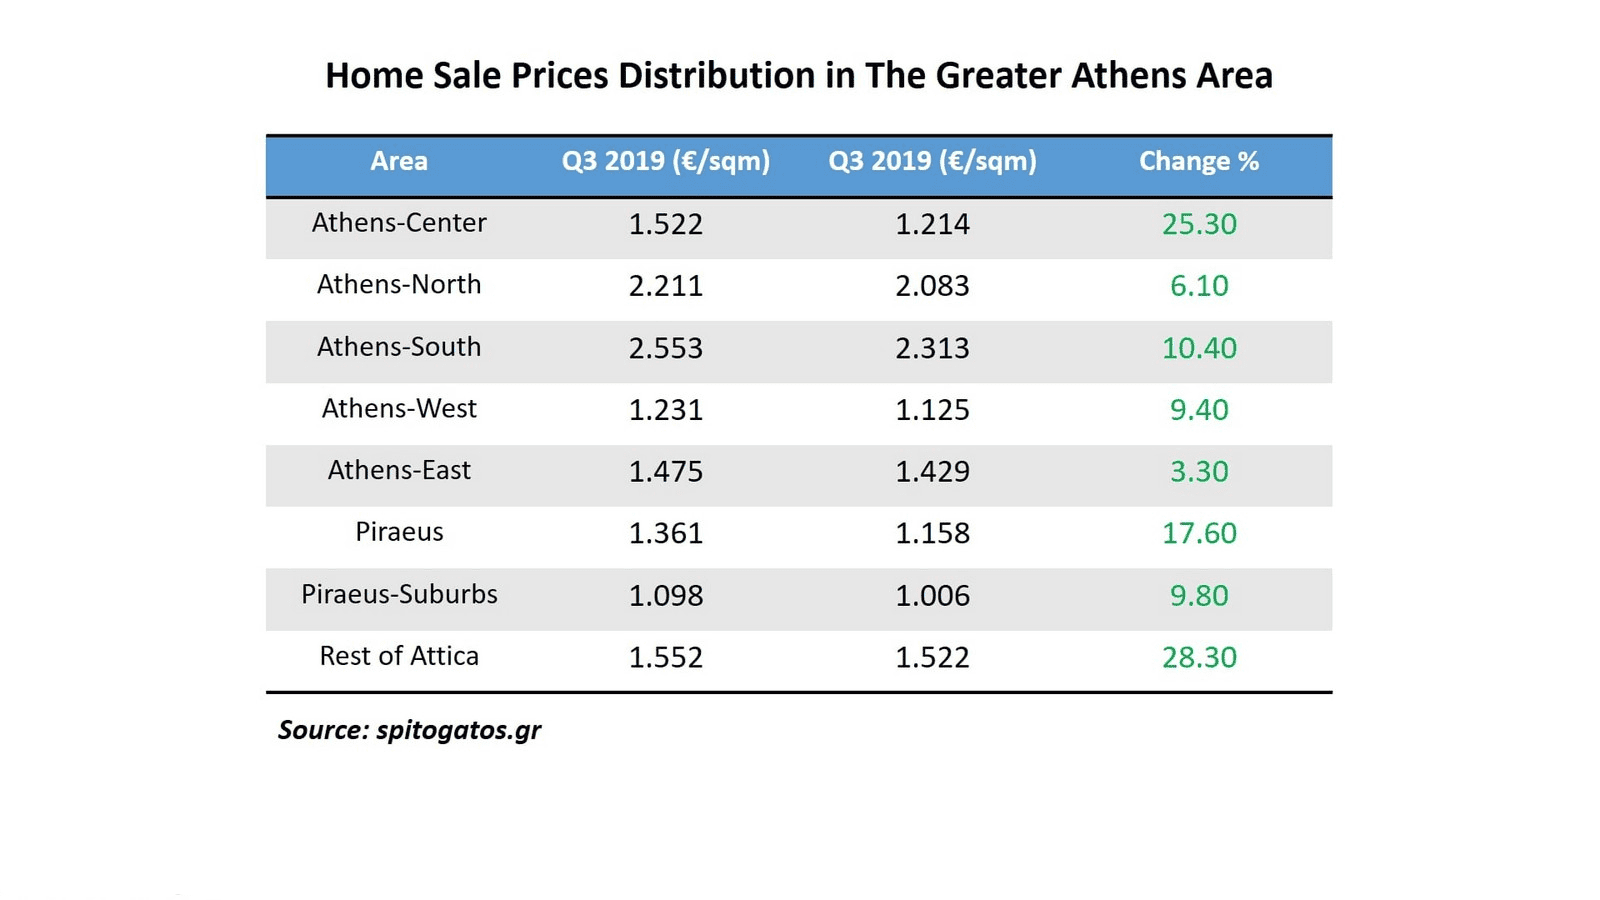 Home Sale Prices Distribution in The Greater Athens Area